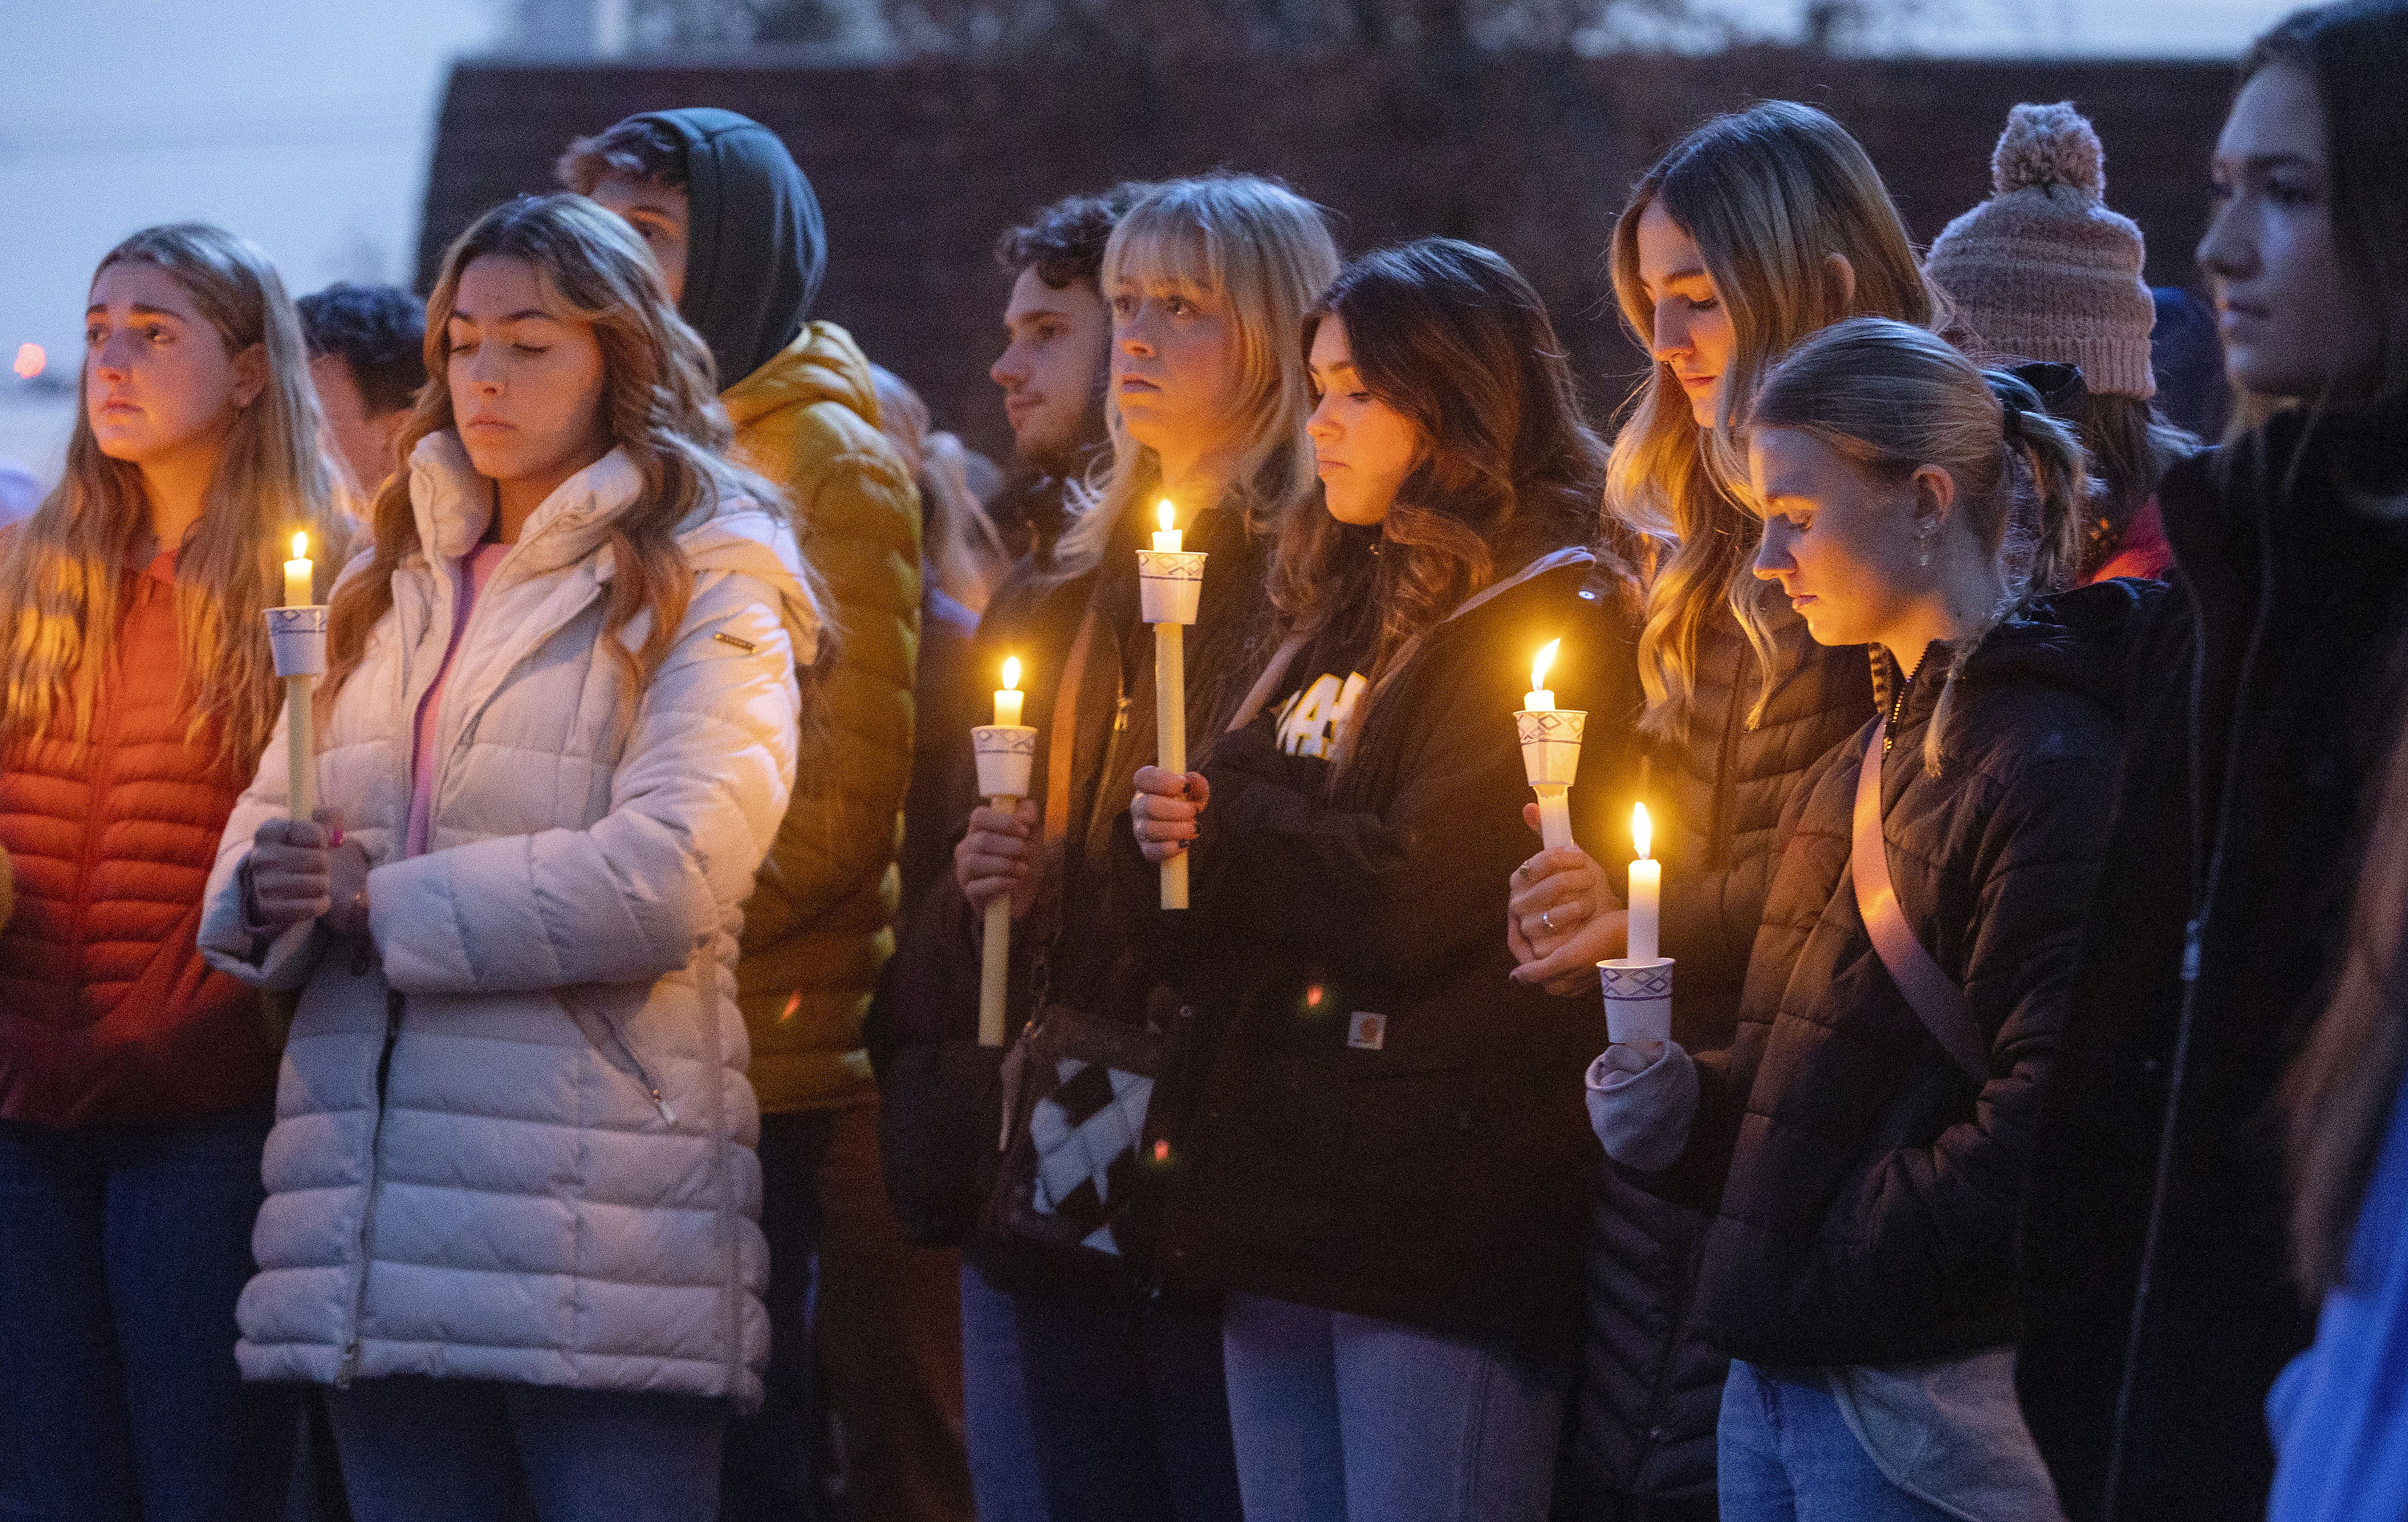 Boise State University students, along with people who knew the four University of Idaho students who were found killed in Moscow, Idaho, days earlier, pay their respects at a vigil held in front of a statue on the Boise State campus, Thursday, Nov. 17, 2022, in Boise, Idaho. 